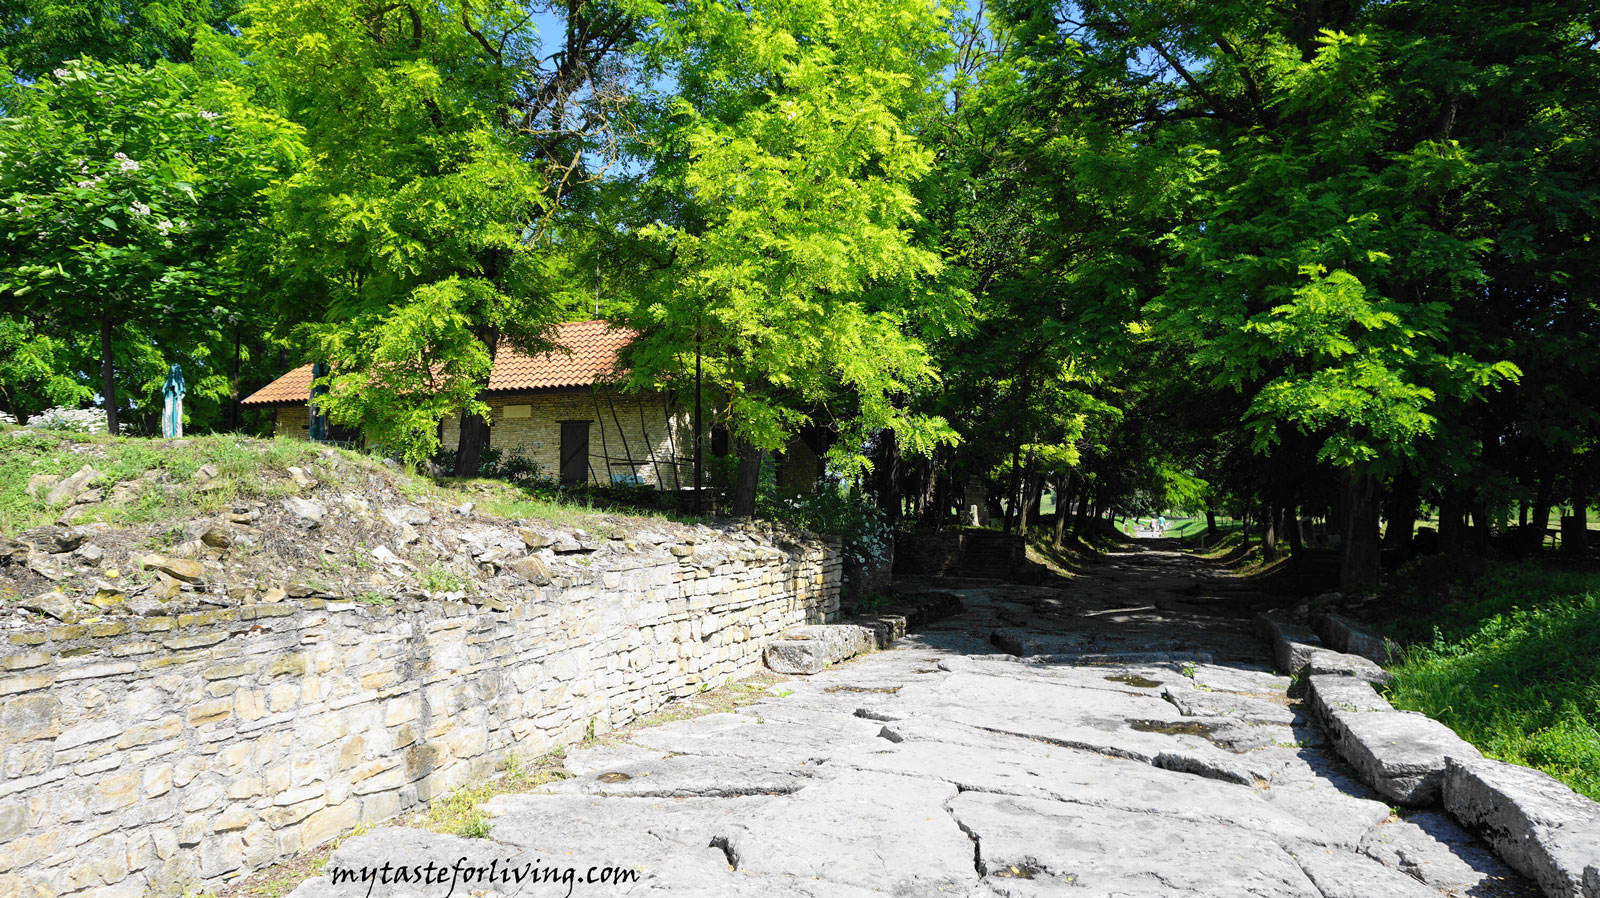 The remains of the early Byzantine town of Nicopolis ad Istrum (translated "City of Victory on the Danube") are located about 20 km north of the town of Veliko Tarnovo, Bulgaria, on the road to Ruse.